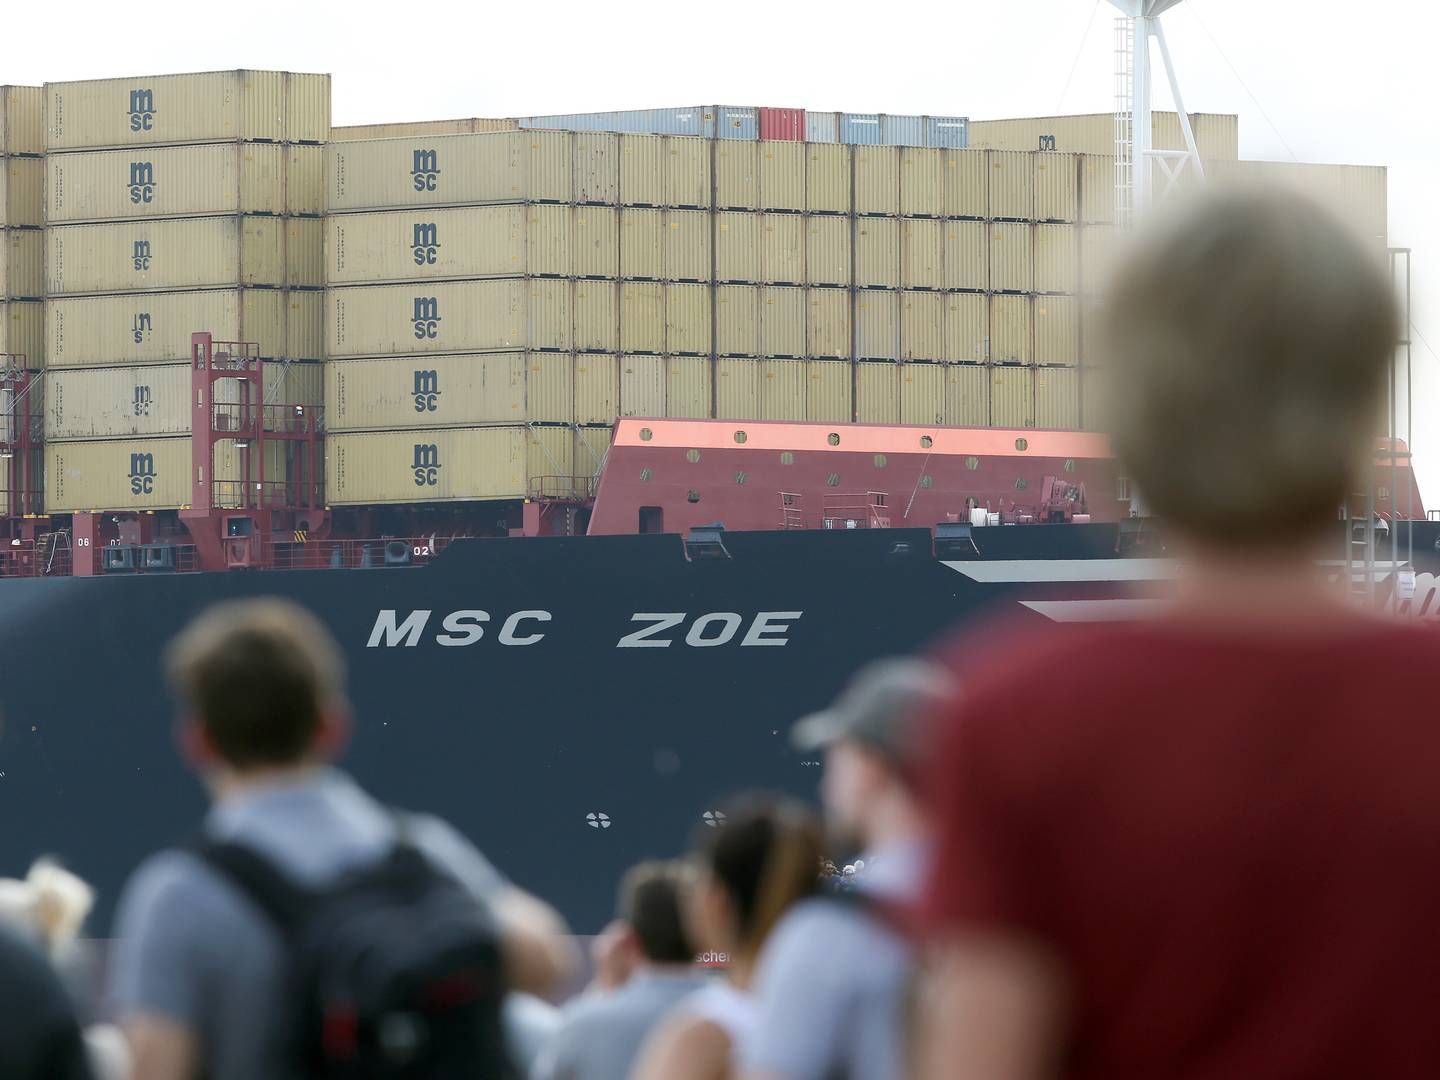 Geneva-based carrier MSC has several Chinese-owned ships in its fleet. These include vessel MSC Zoe, which is ultimately owned by the Chinese state-owned Bank of Communications. | Photo: Bodo Marks/AP/Ritzau Scanpix